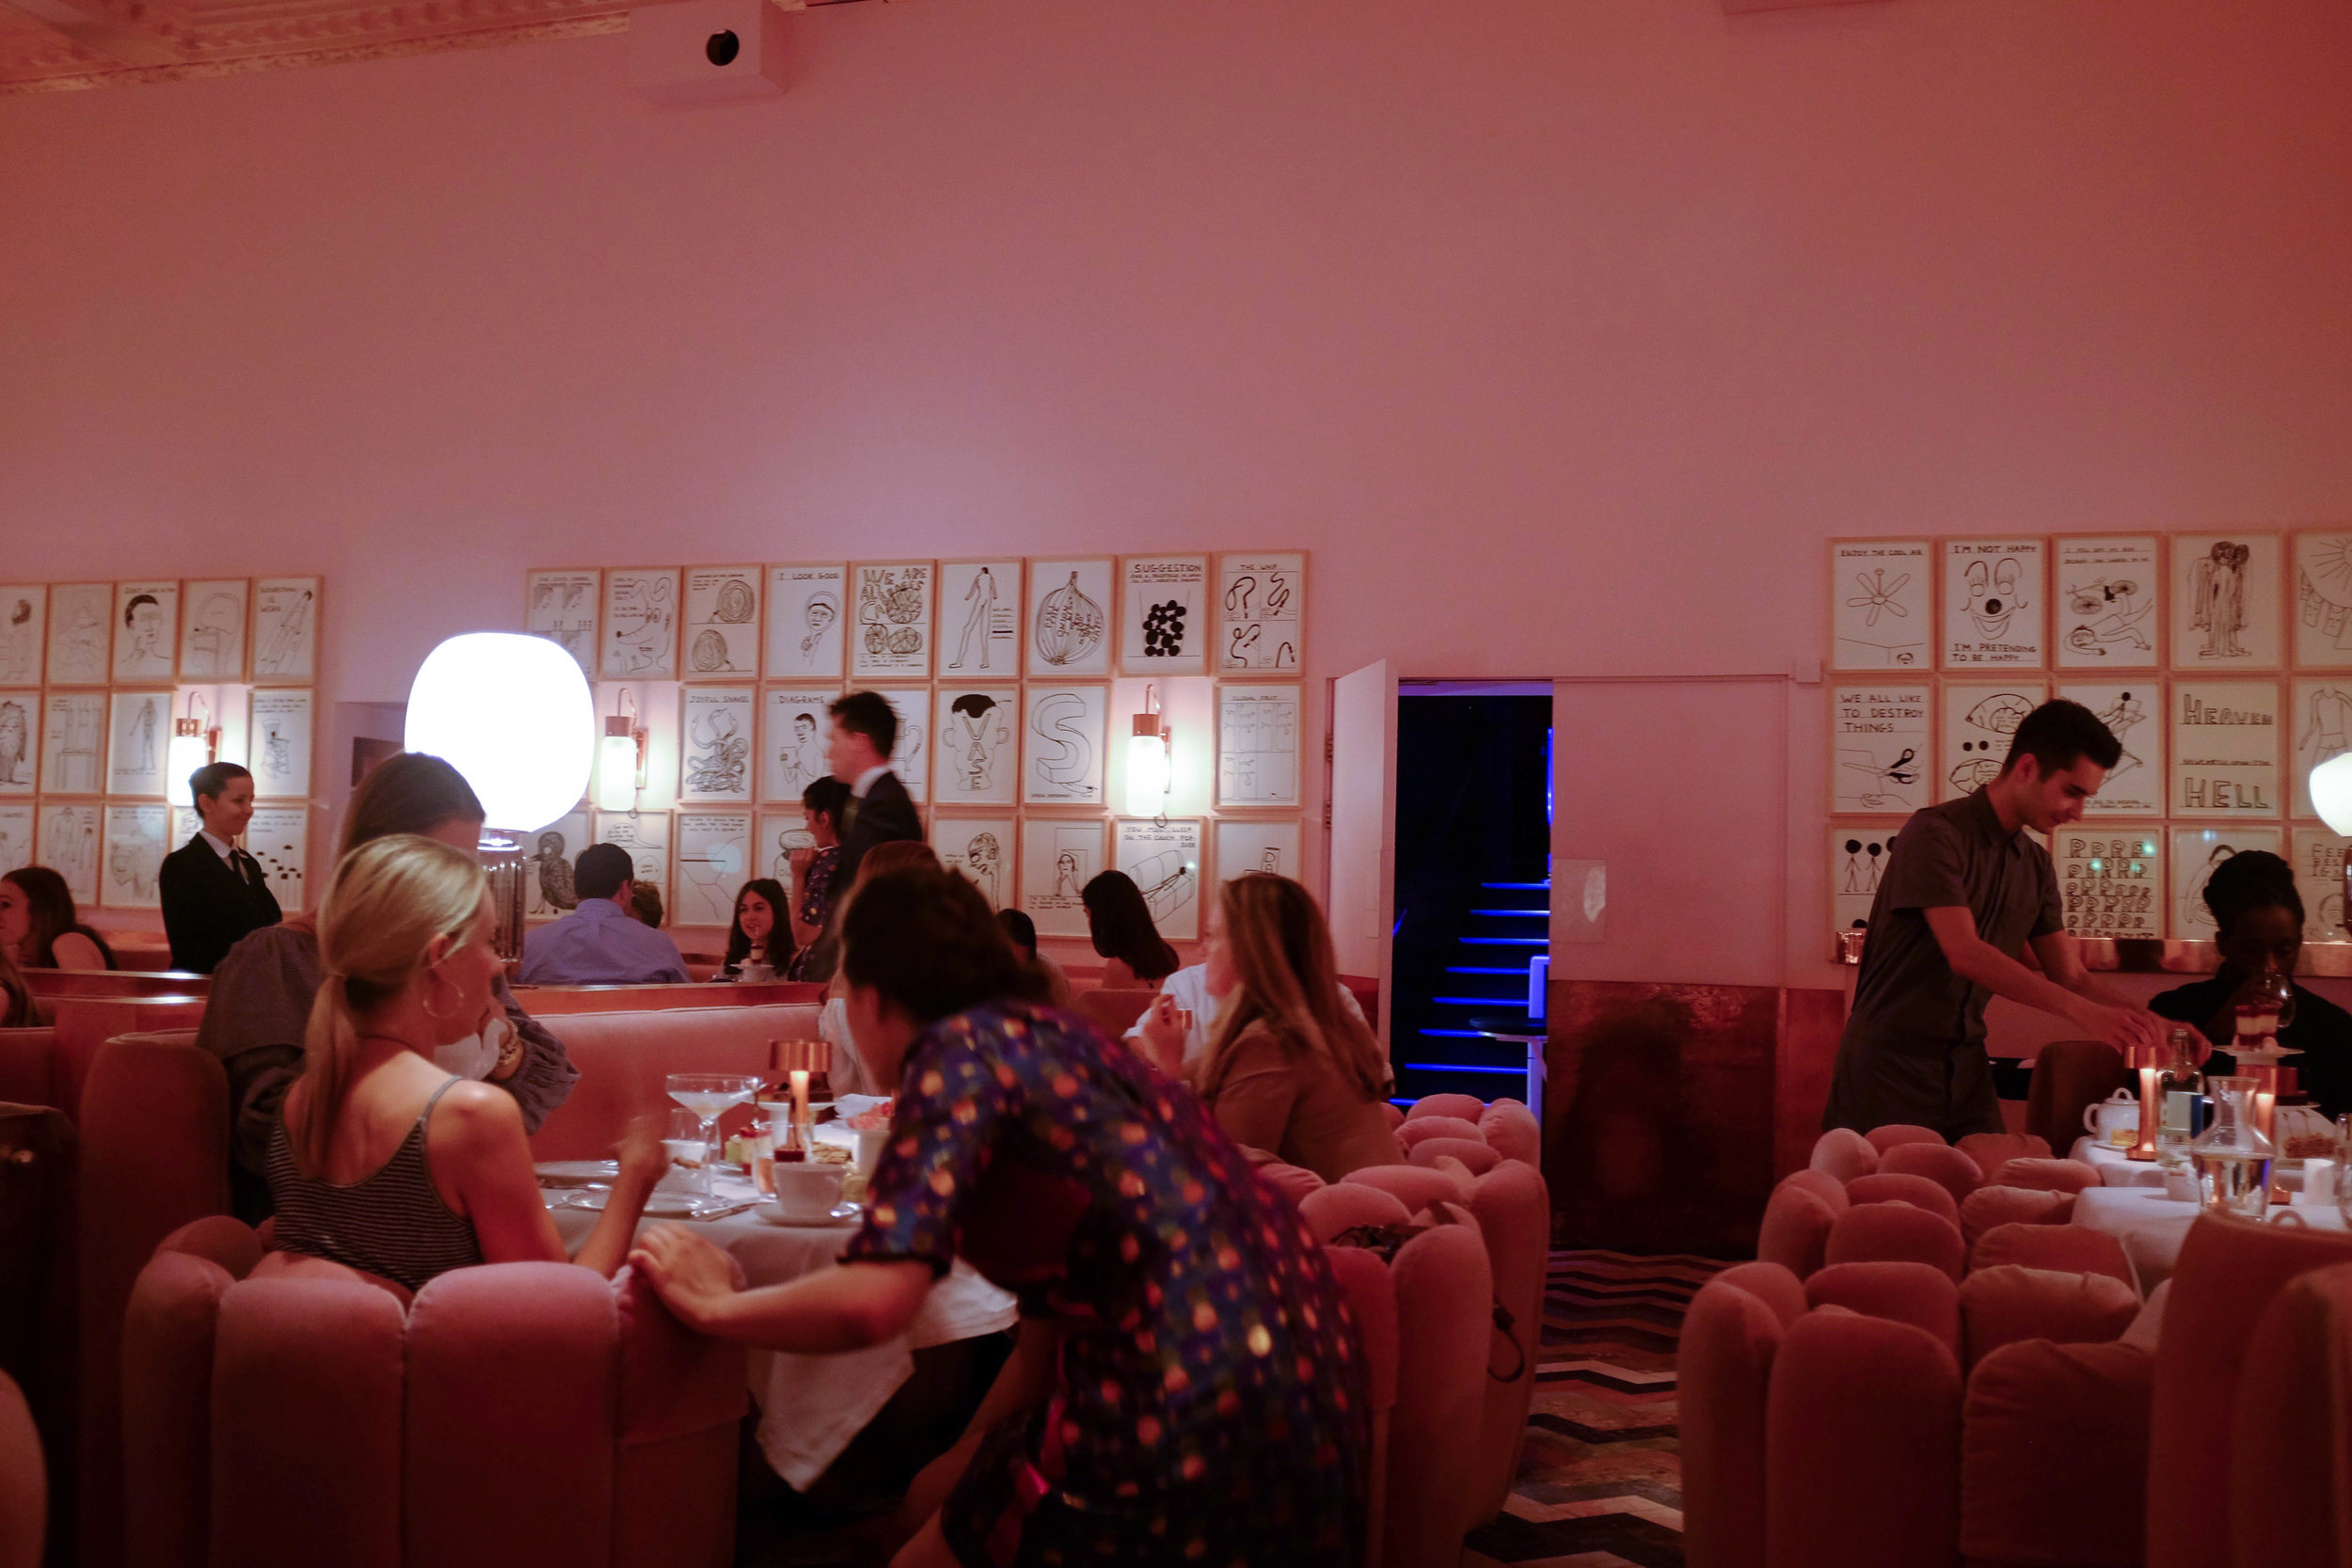 Afternoon Tea At Sketch In London Thoughts On Making Room